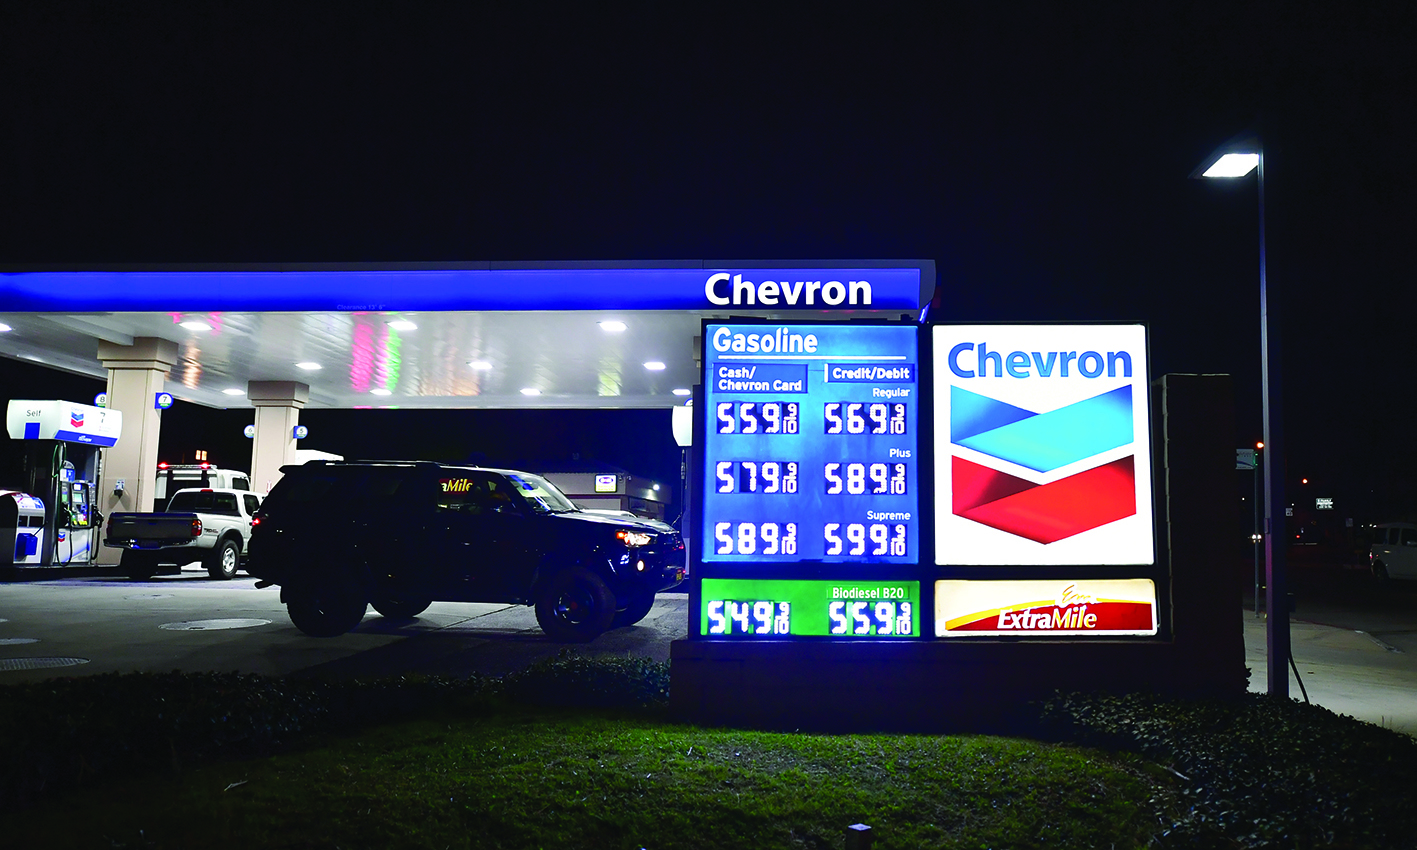 MONTEREY PARK, US: Prices for gas and diesel fuel, over $5 a gallon, are displayed at a petrol station in Monterey Park, California on Friday.-AFPn